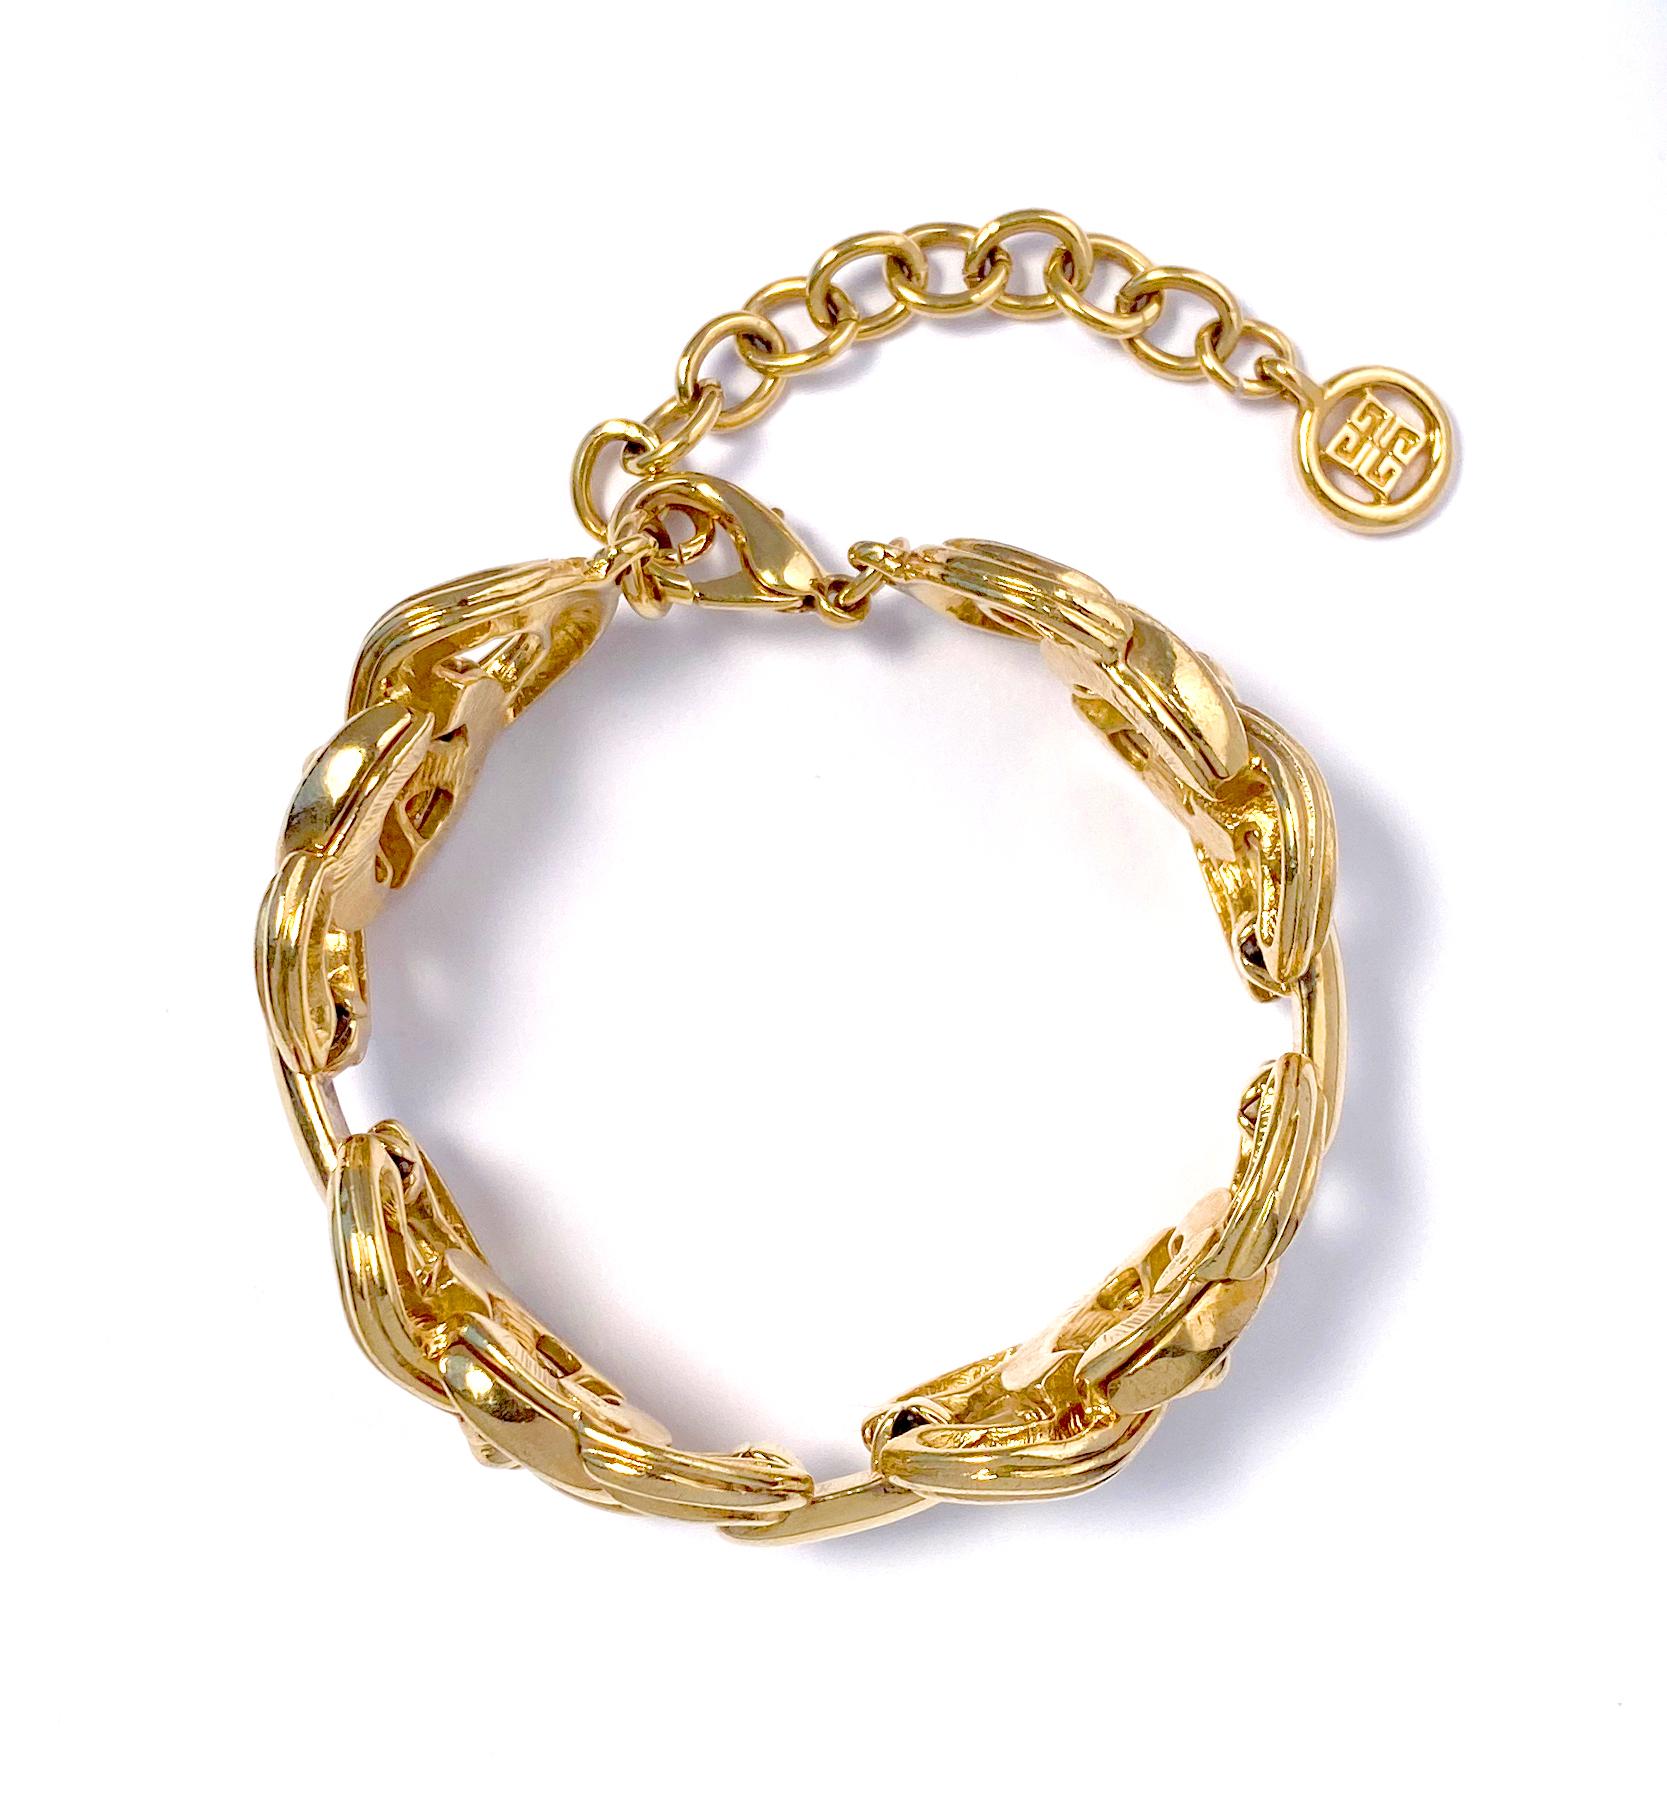 Vintage Givenchy Big Link Chain Bracelet, 1980s In Good Condition For Sale In London, GB